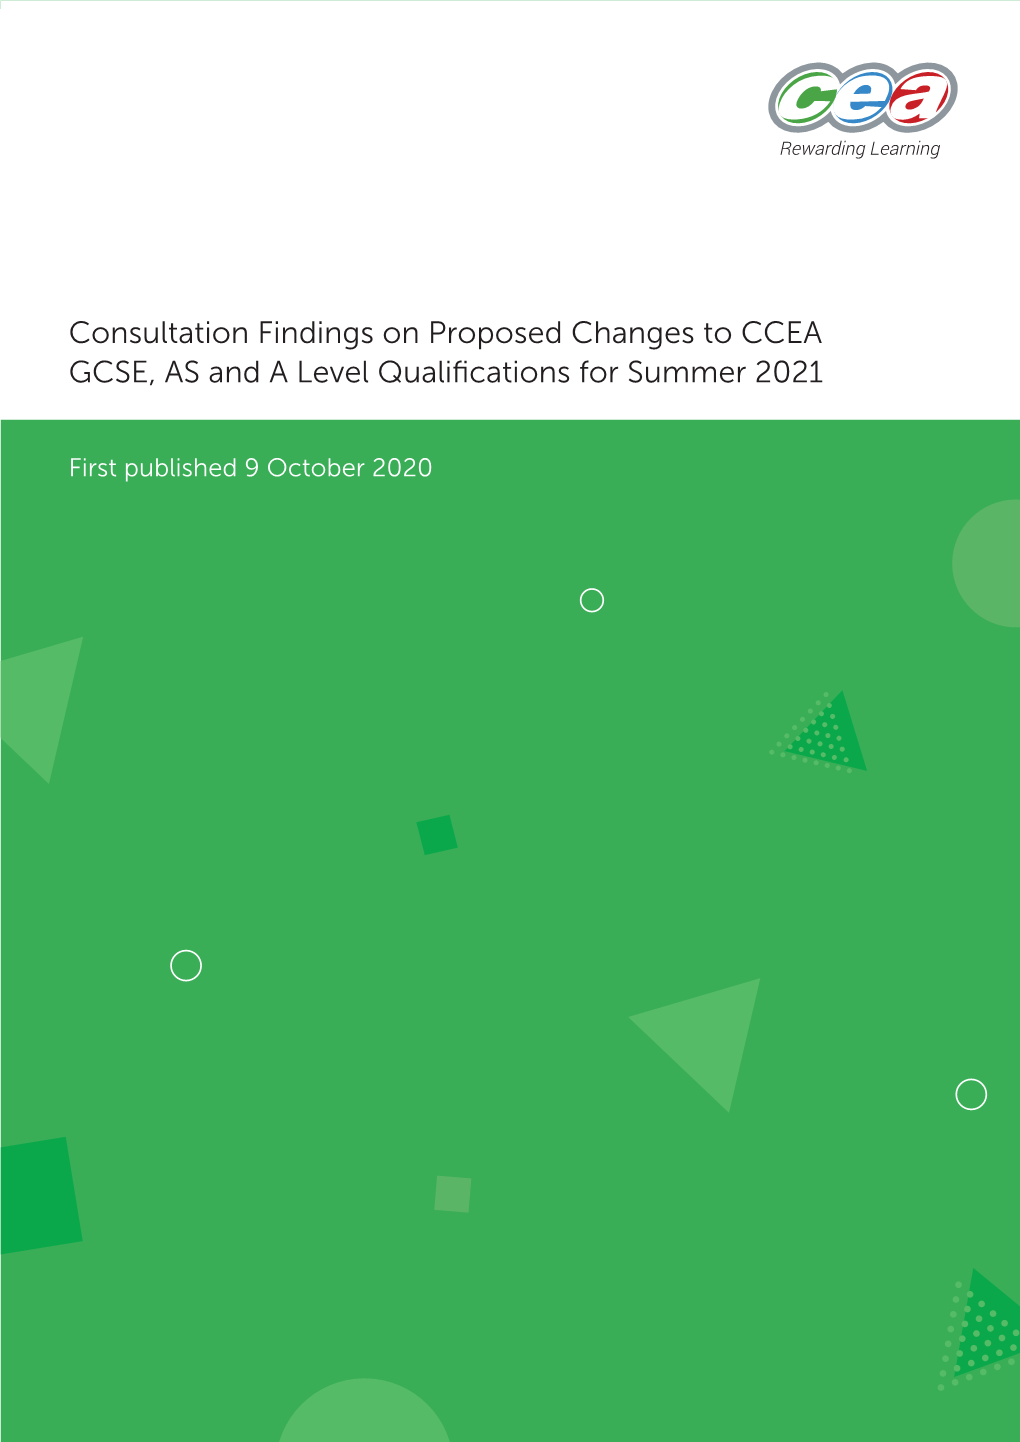 CCEA Consultation on Proposed Changes 2021 [FINAL DRAFT] V2 for Design, with Queries 14-09-DESIGN-VERSION-Trackaccept